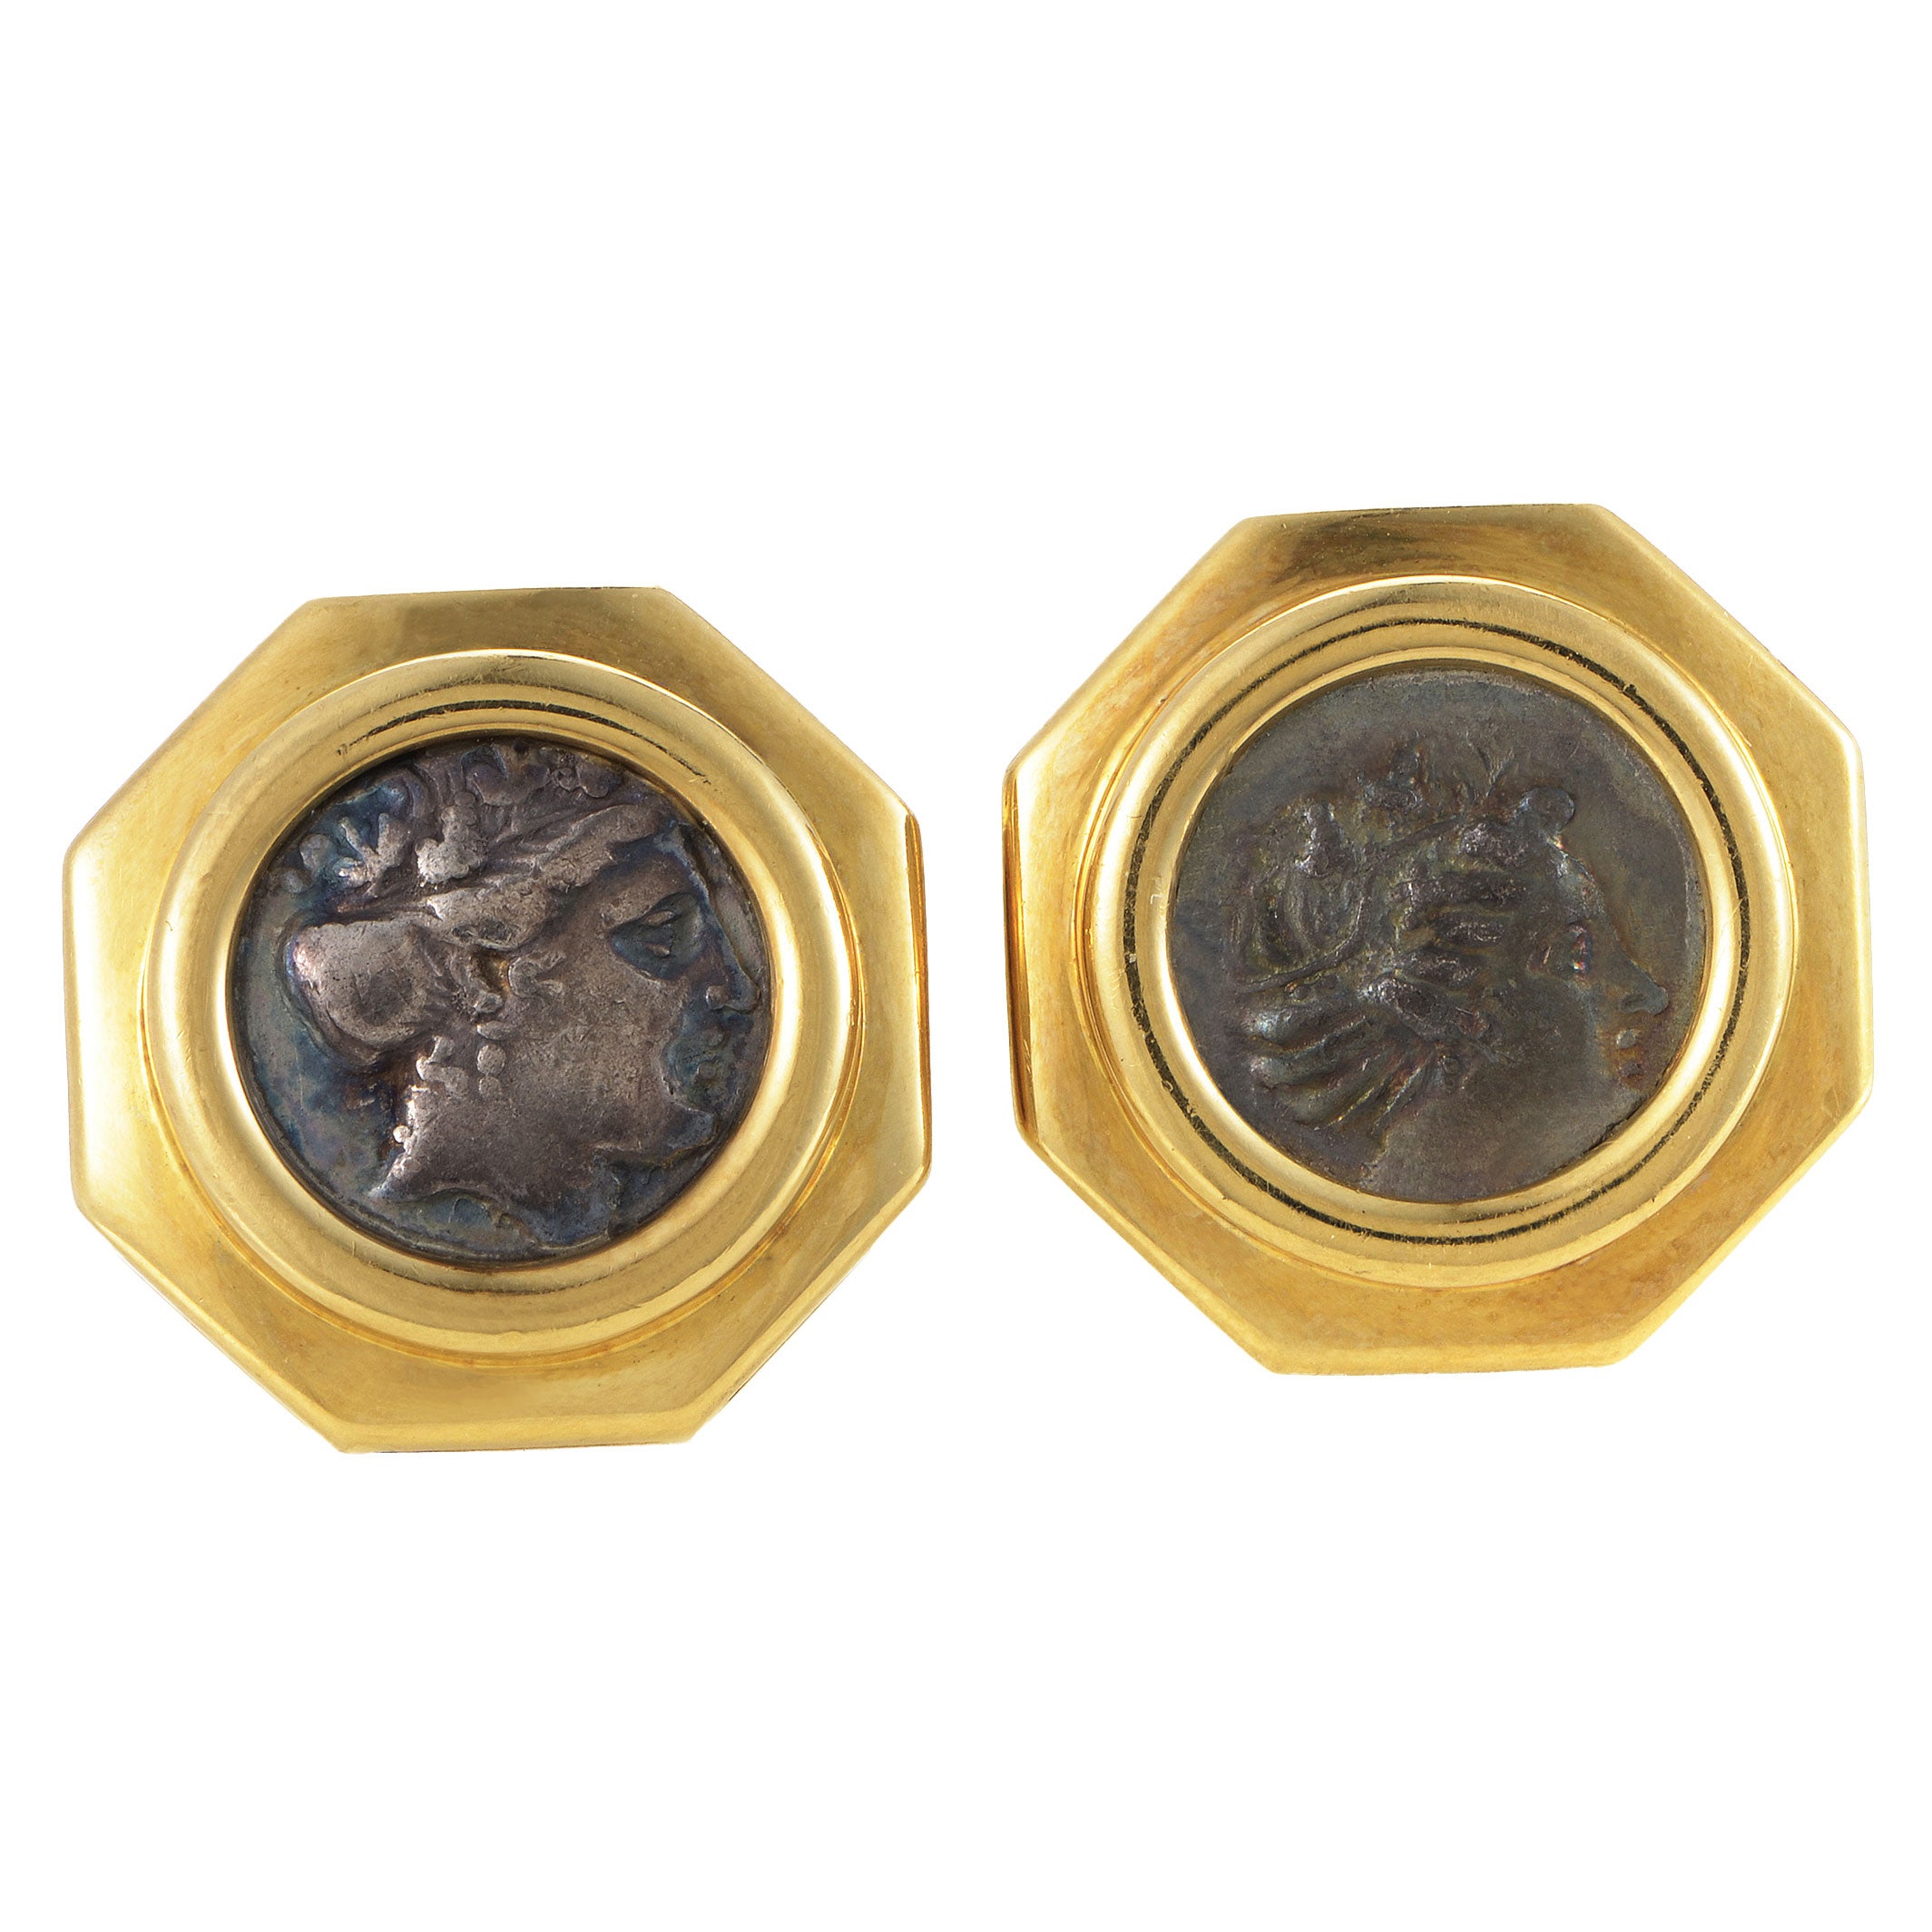 Bvlgari Gold And Antique Coin Monete Cufflinks Available For Immediate Sale  At Sotheby's